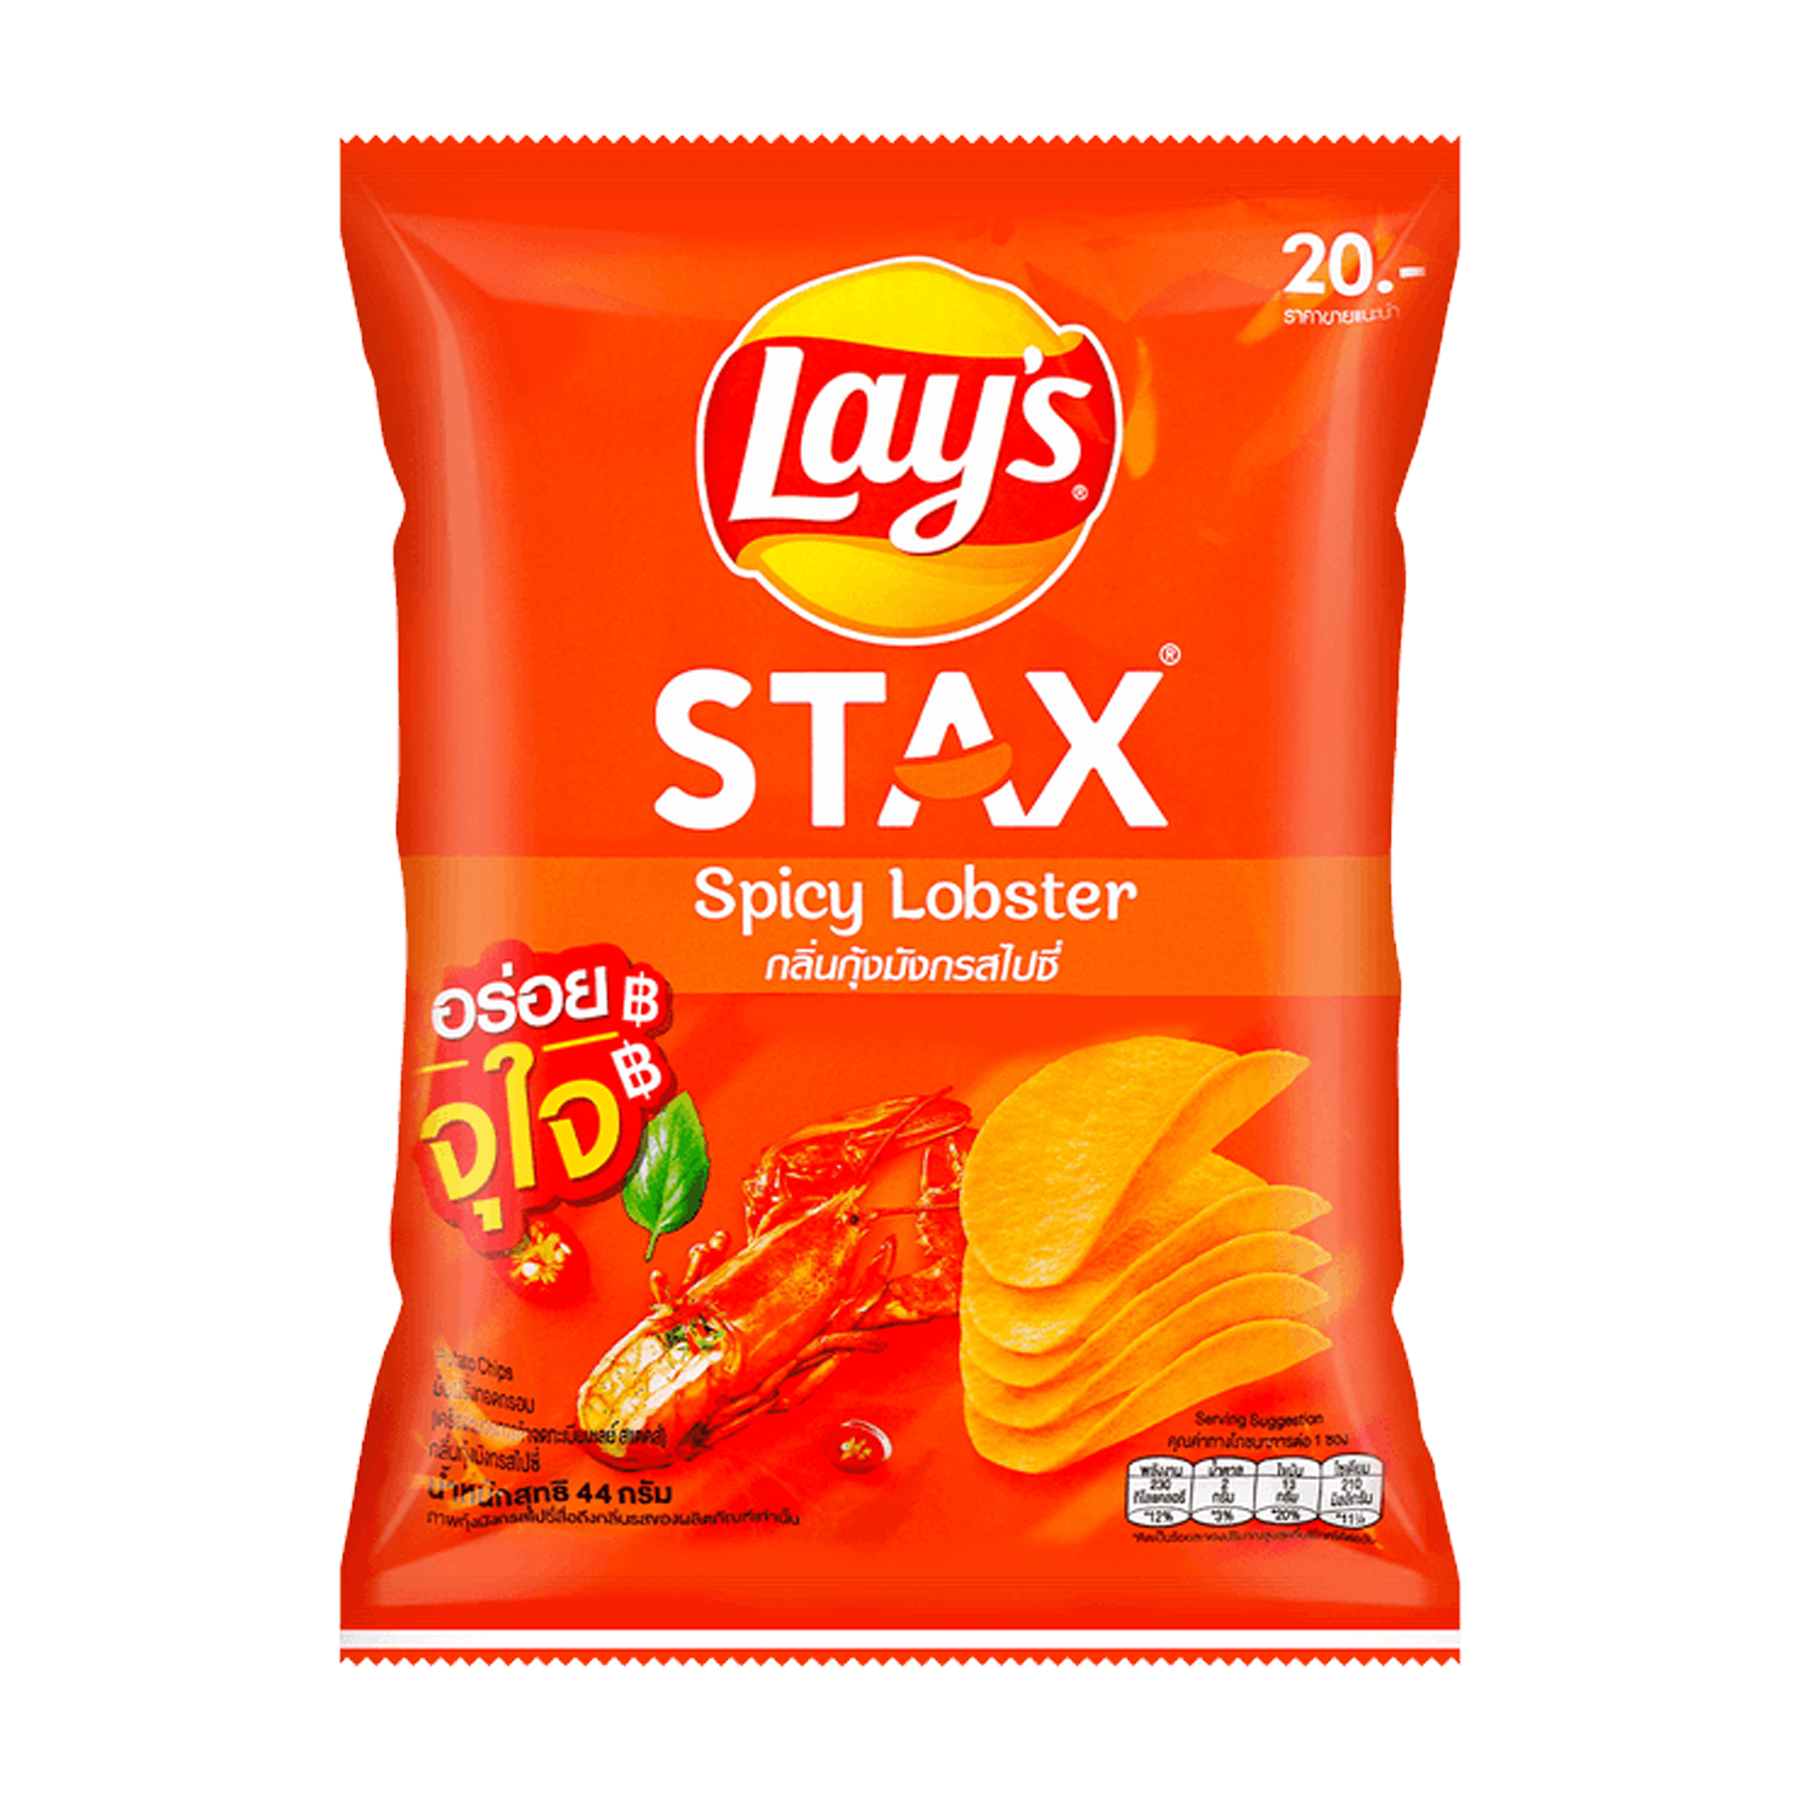 Lays Stax Spicy Lobster Flavored Chips